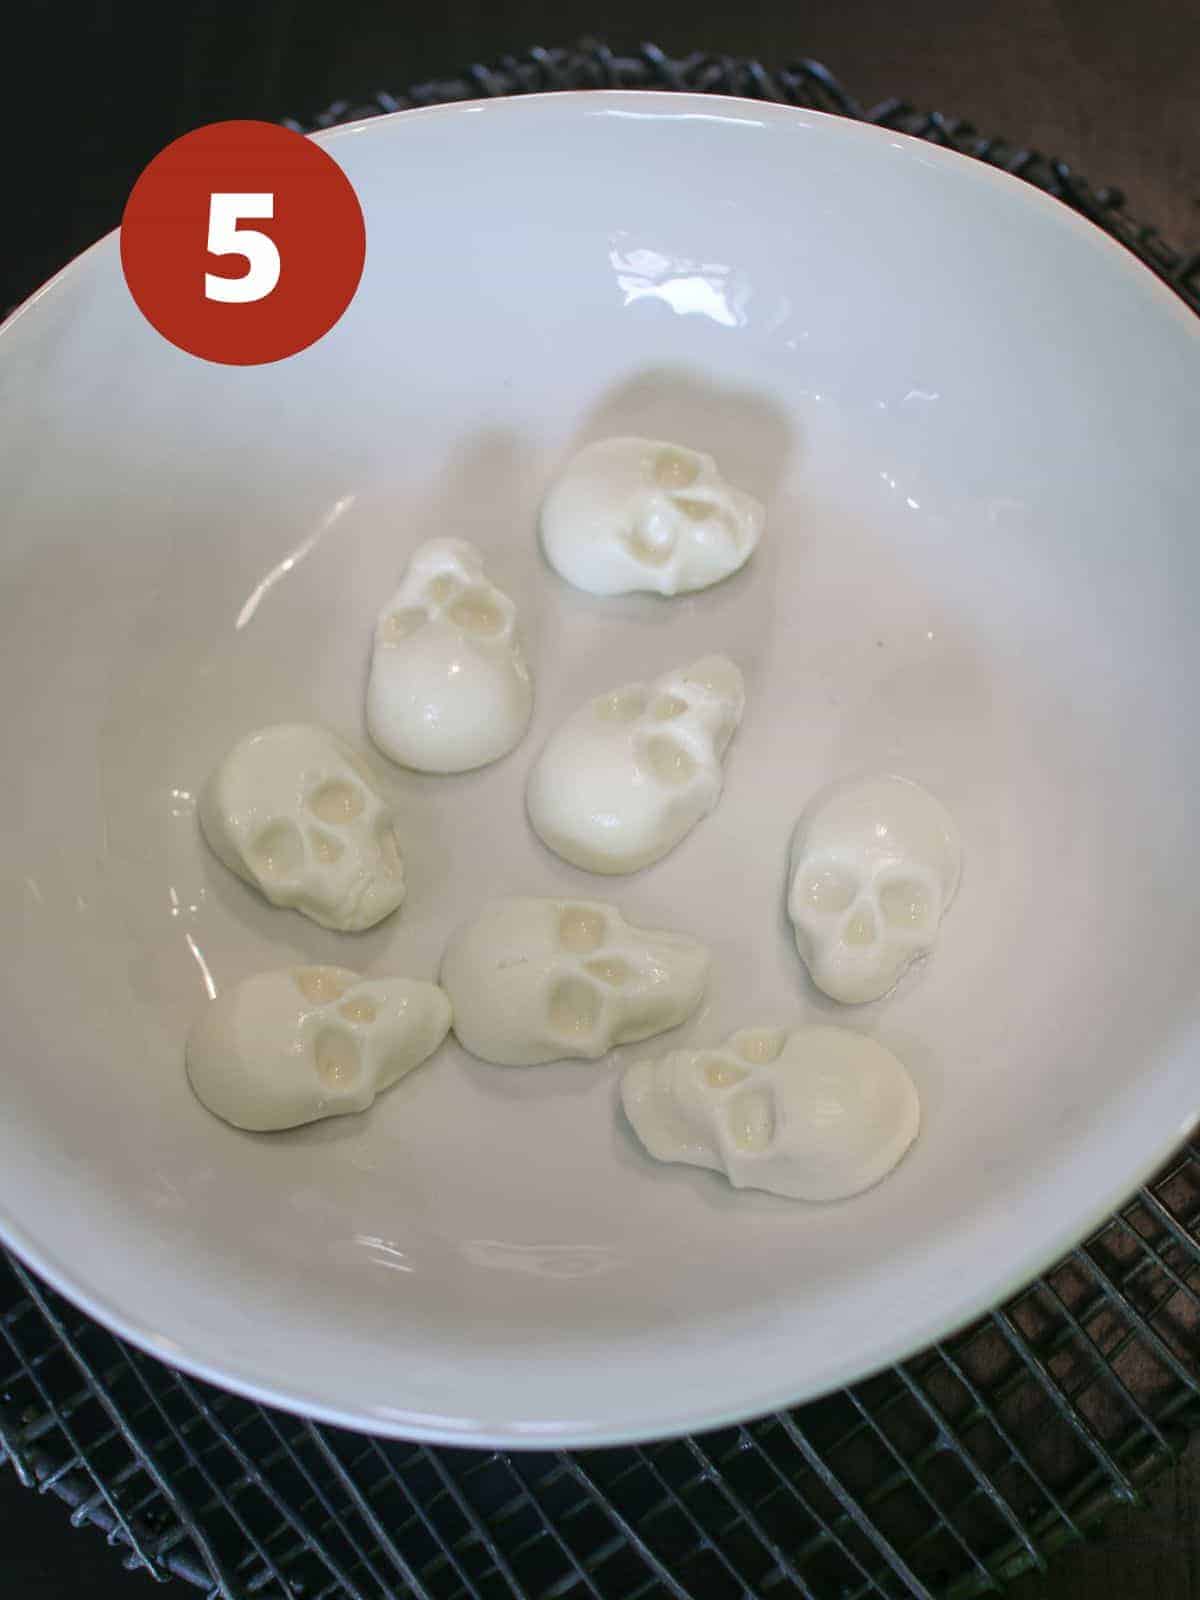 8 mozzarella shaped skulls in a white low bowl on a black wire trivet on a black background. A dark red circle is in the upper left corner and a '5' in white text color.